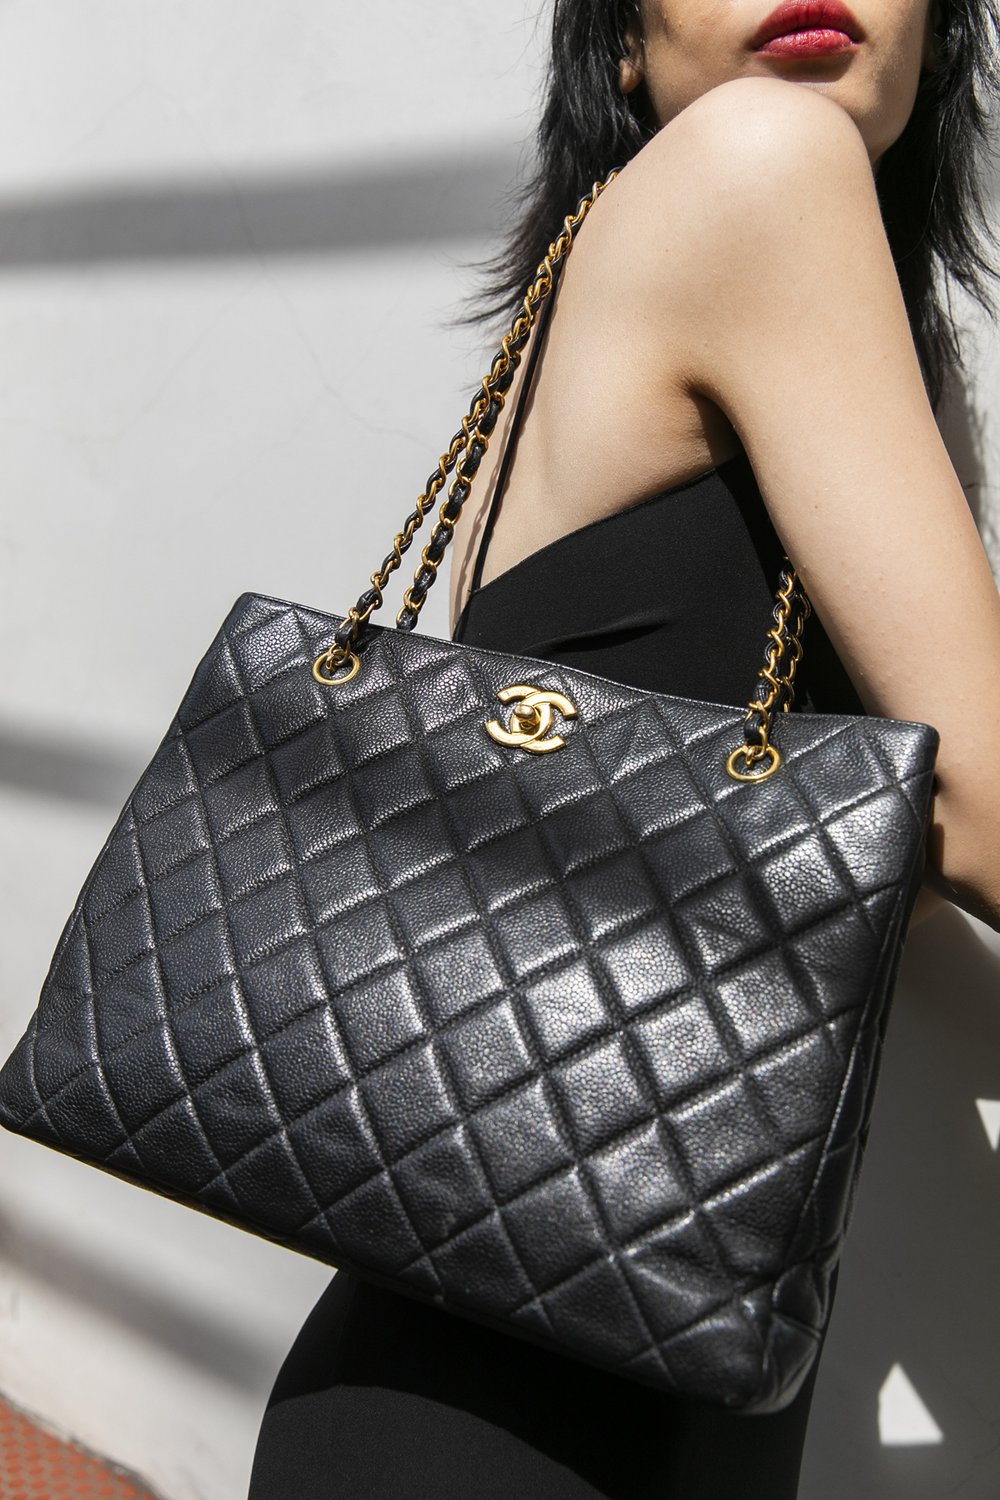 chanel quilted leather handbag black